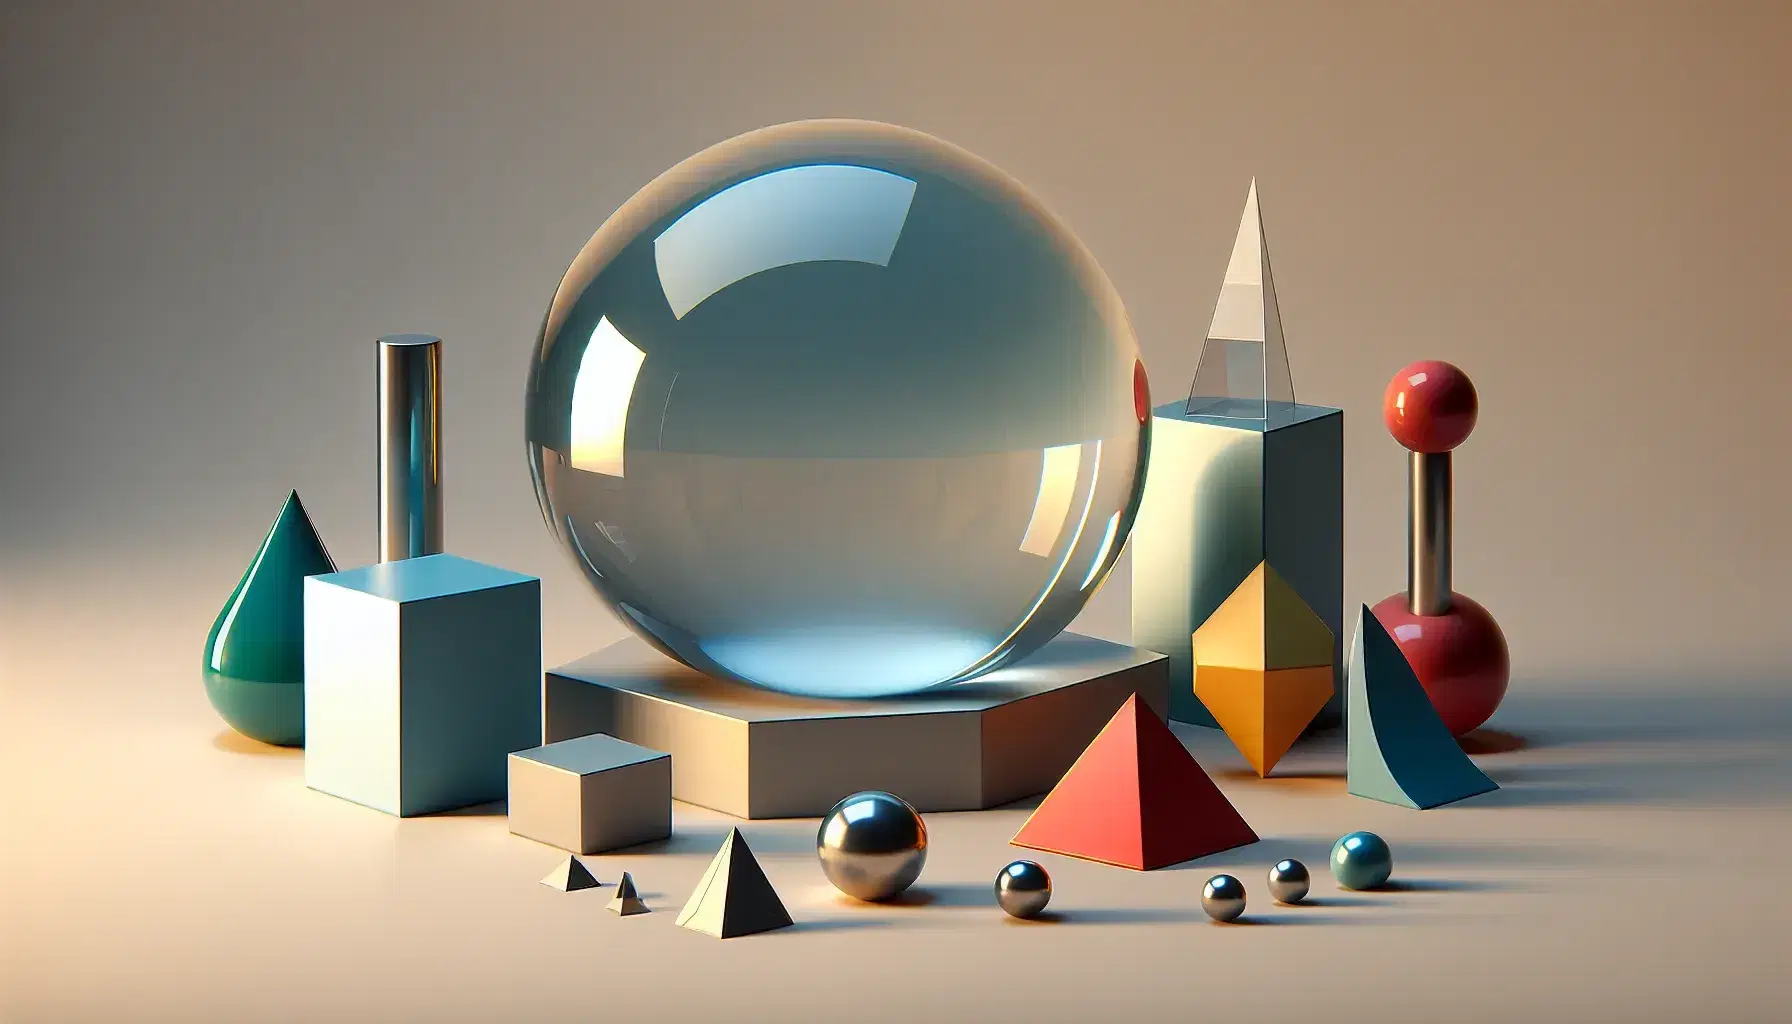 Assorted 3D geometric shapes with a transparent sphere, blue cube, red cylinder, green cone, yellow pyramid, silver tetrahedron, and orange octahedron on a light background.